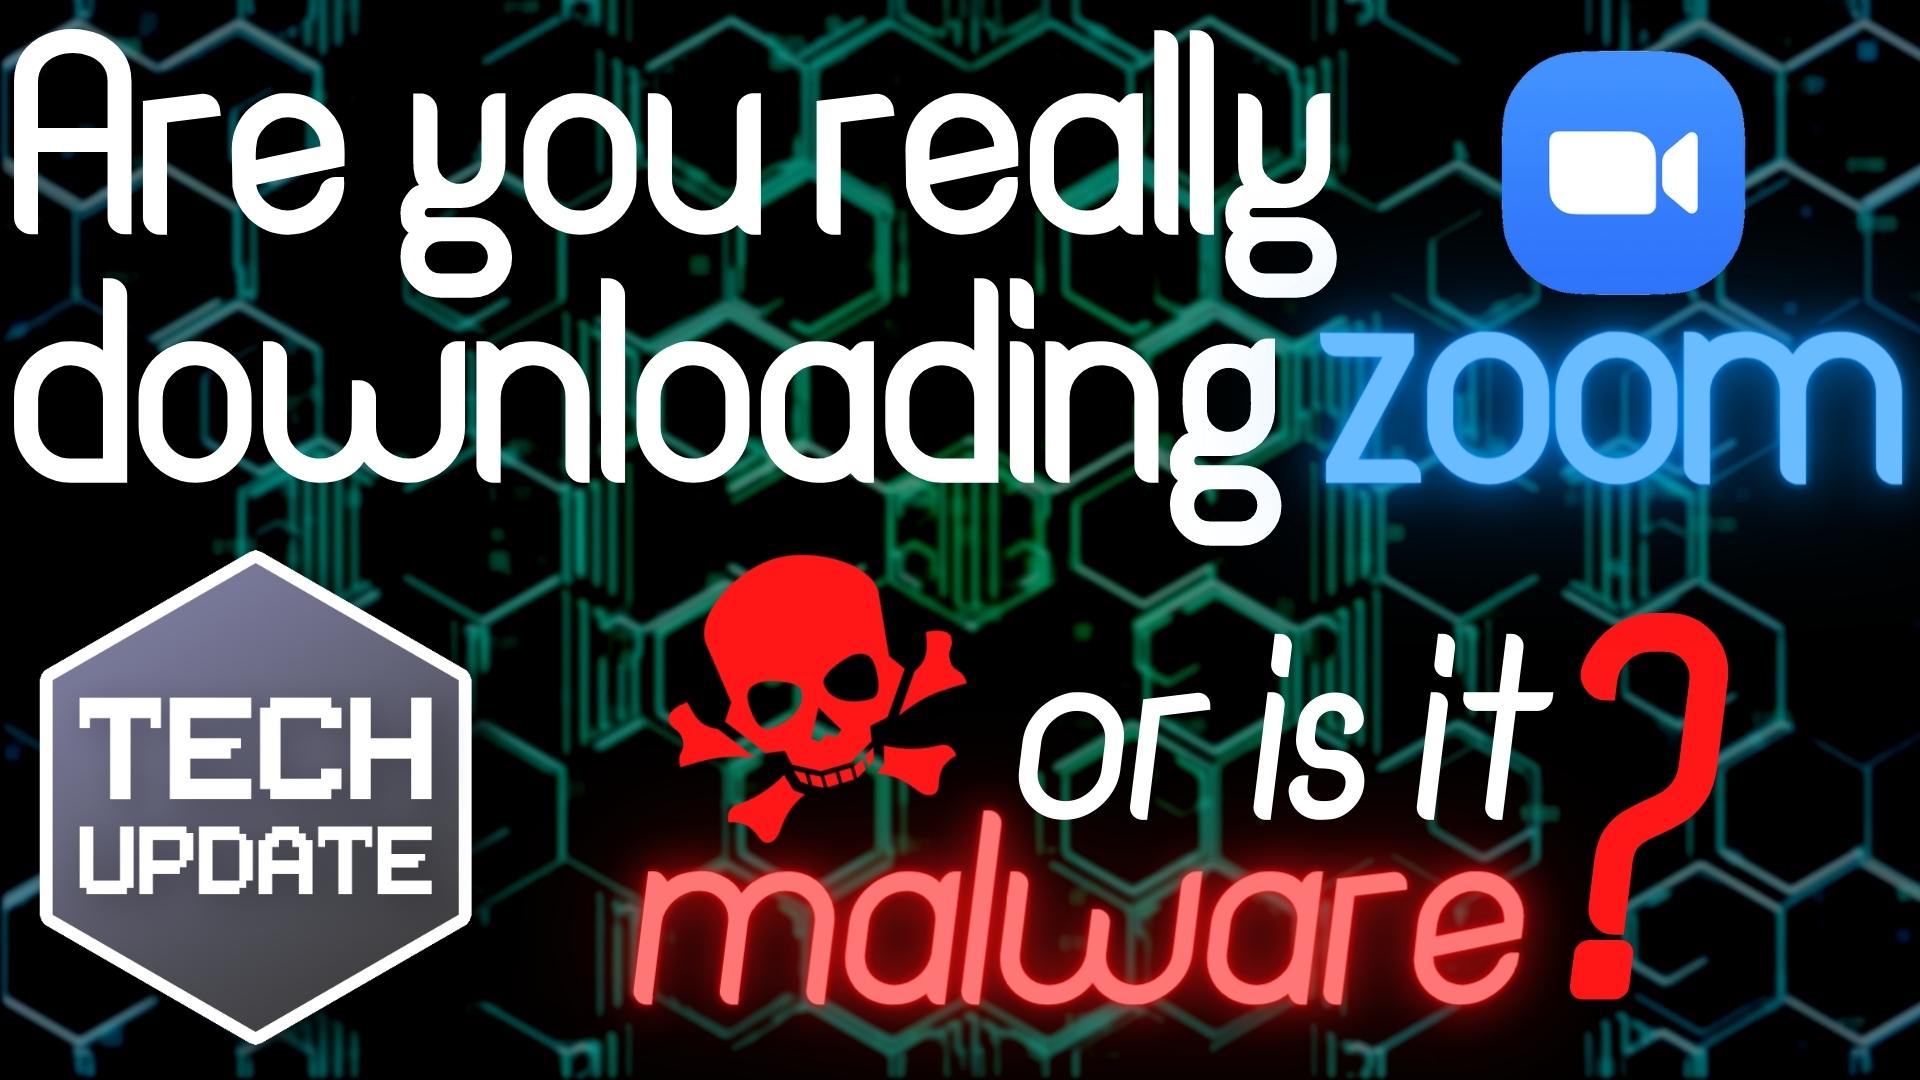 Are you really downloading zoom? tech is it malware?.